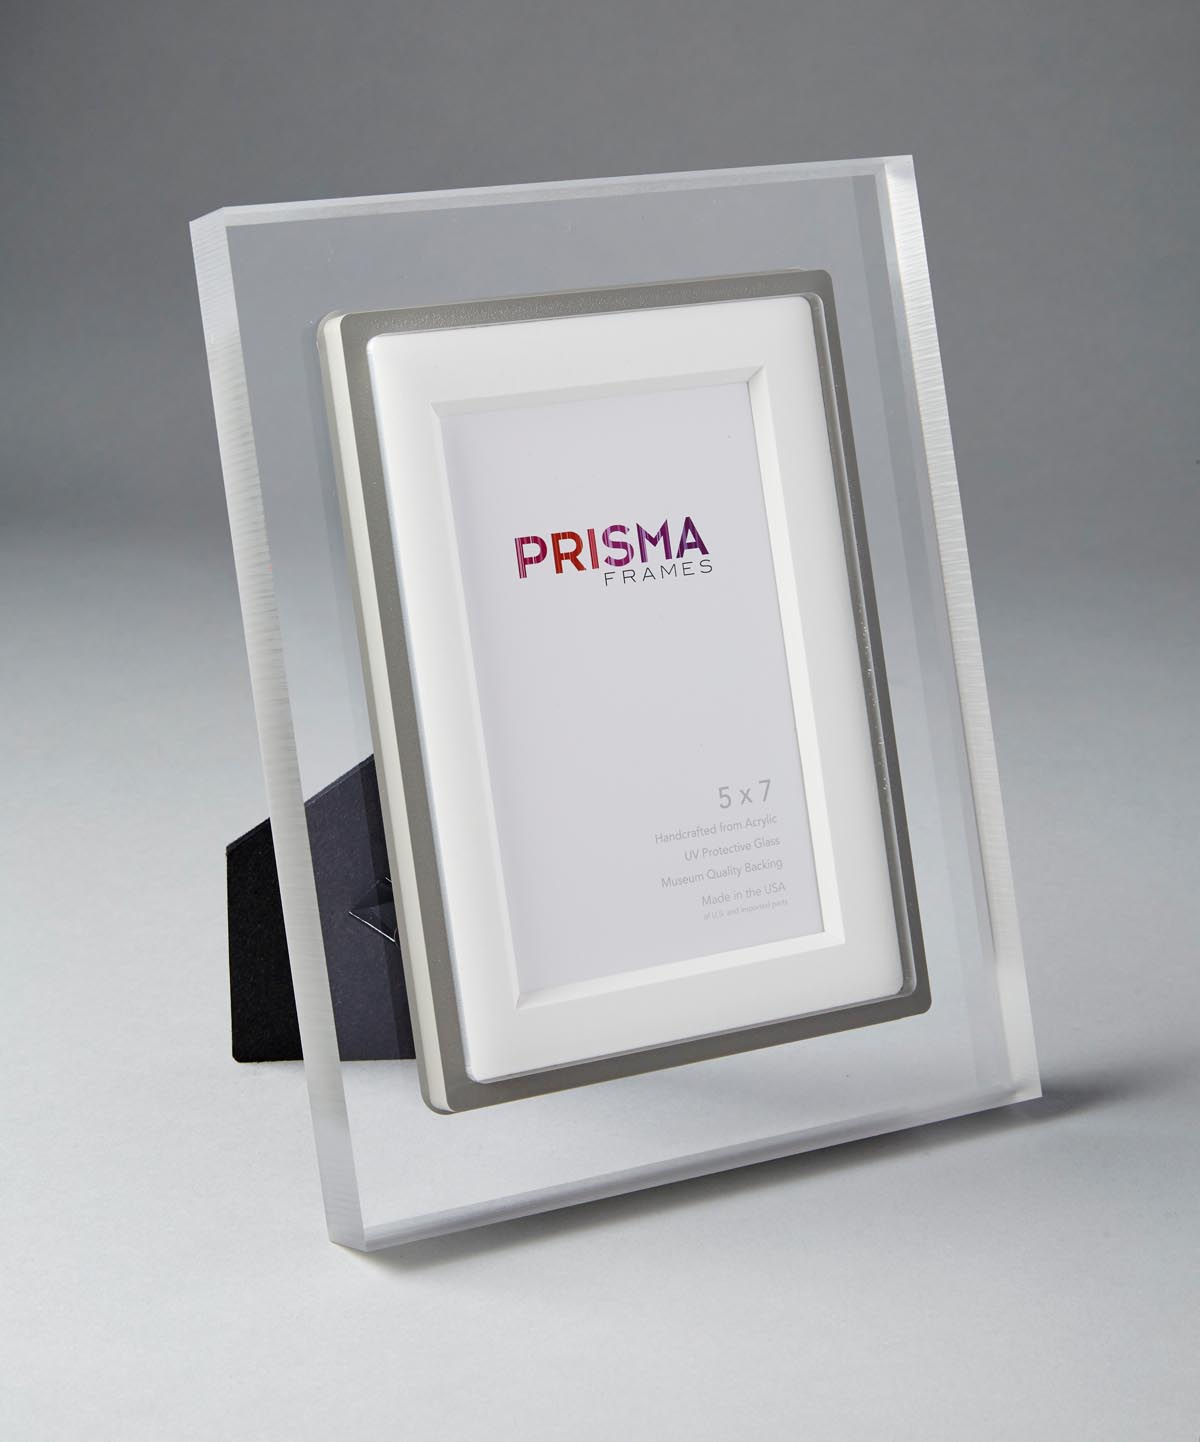 Circa grey clear lucite frame - side view